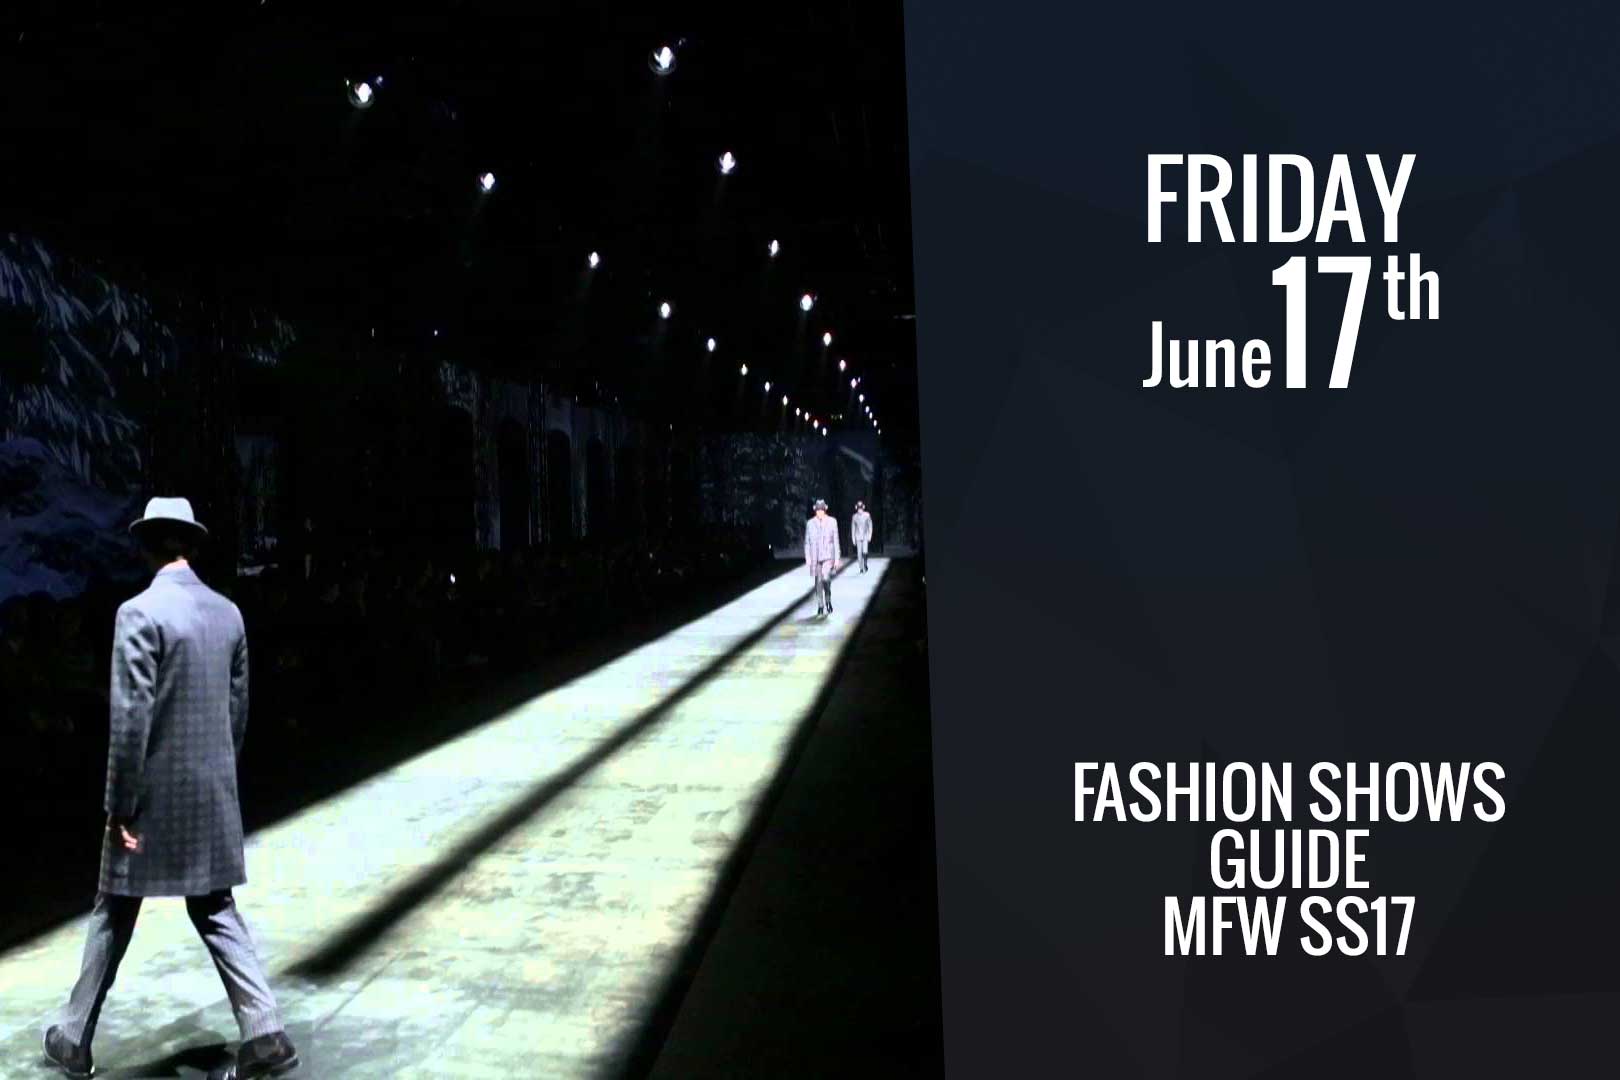 Friday June 17th: fashion shows guide